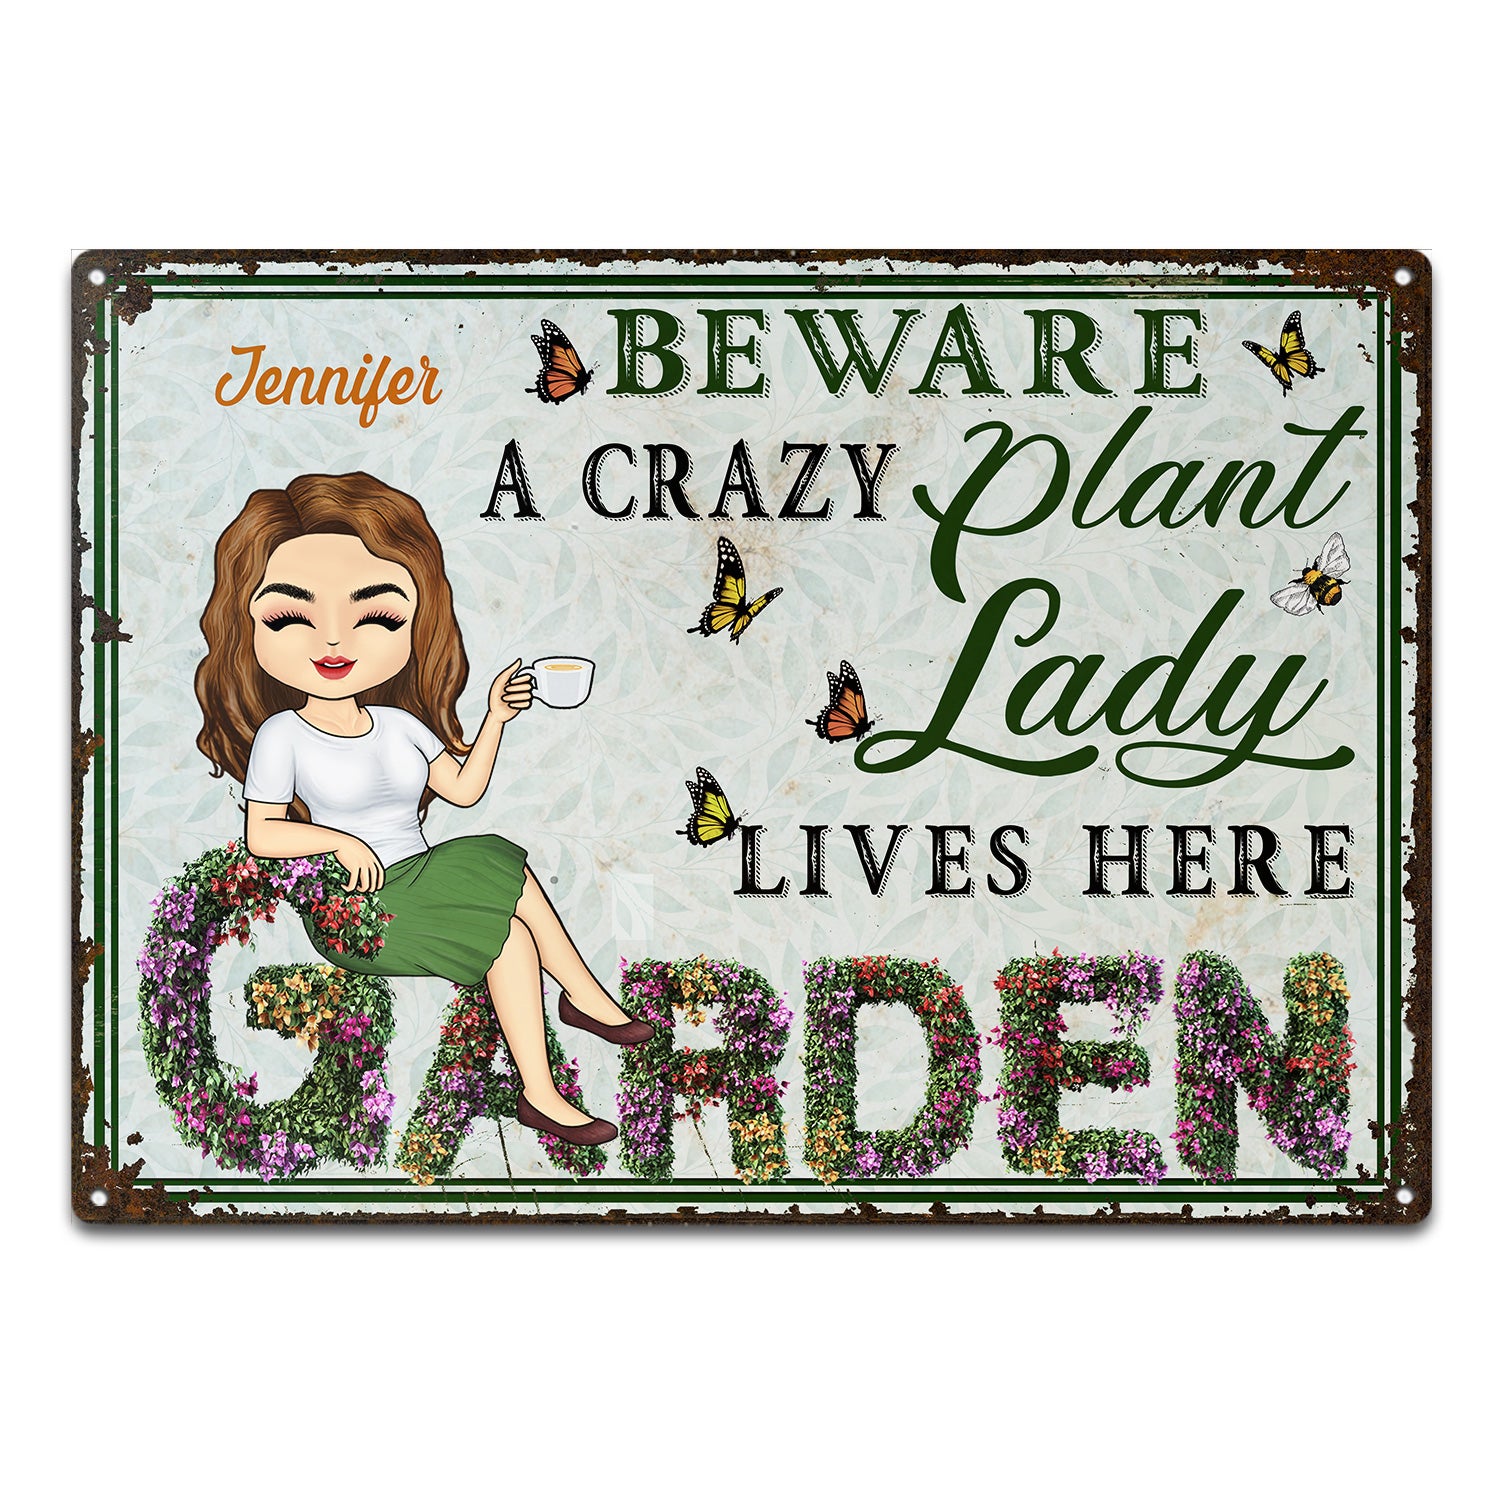 And Into The Garden I Go - Beware A Crazy Plant Lady Lives Here - Birthday, Housewarming Gift For Her, Him, Gardener, Outdoor Decor - Personalized Custom Metal Signs